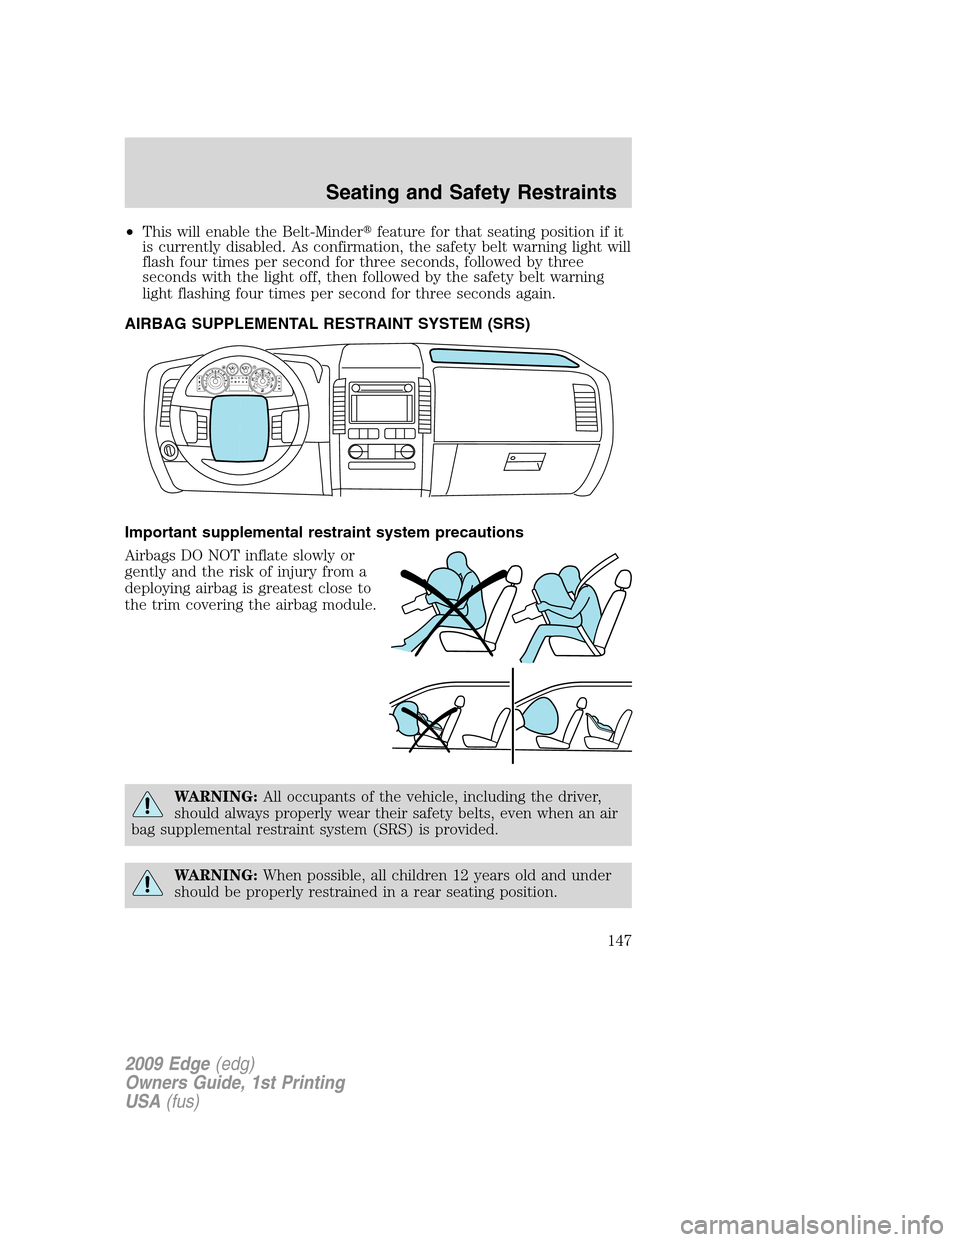 FORD EDGE 2009 1.G Owners Manual •This will enable the Belt-Minderfeature for that seating position if it
is currently disabled. As confirmation, the safety belt warning light will
flash four times per second for three seconds, fo